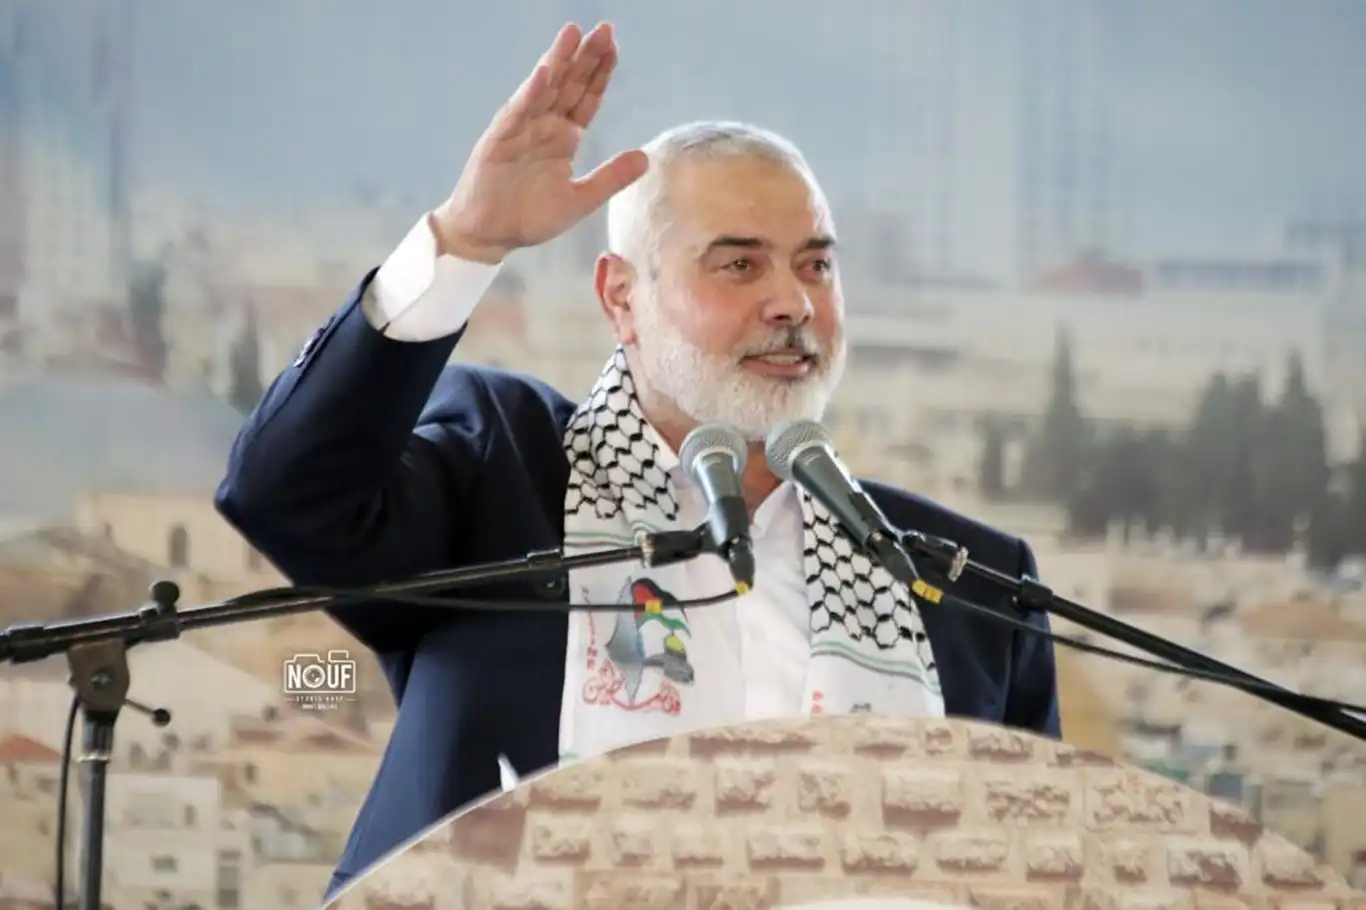 Ismail Haniyeh: A life of resistance and sacrifice for Palestinian freedom